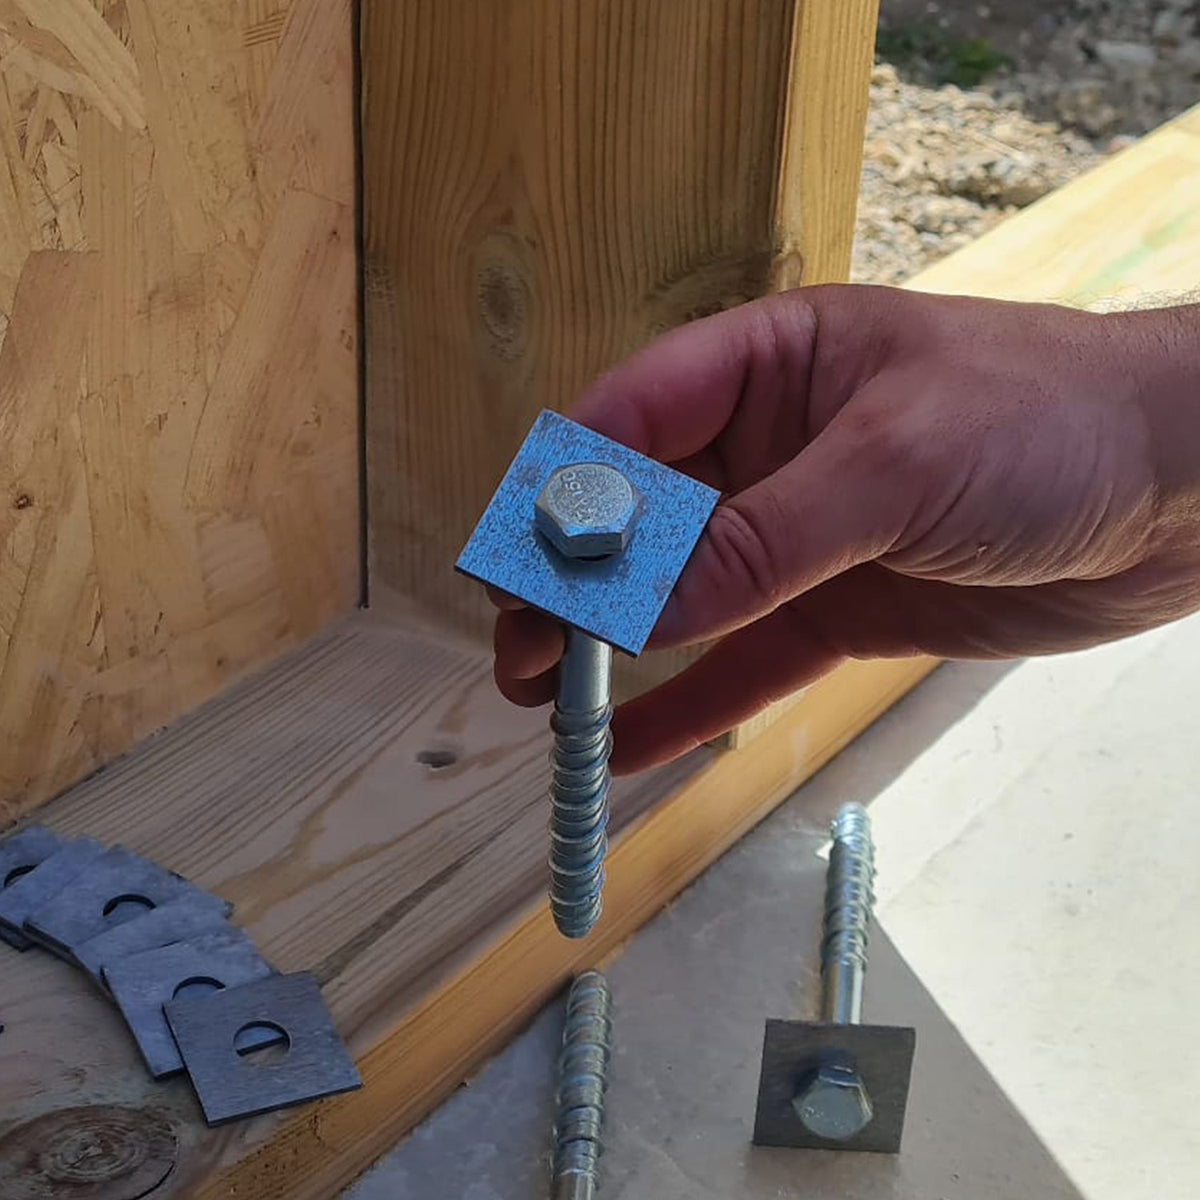 Man Holding Square Washer with a Bolt doing carpentry work